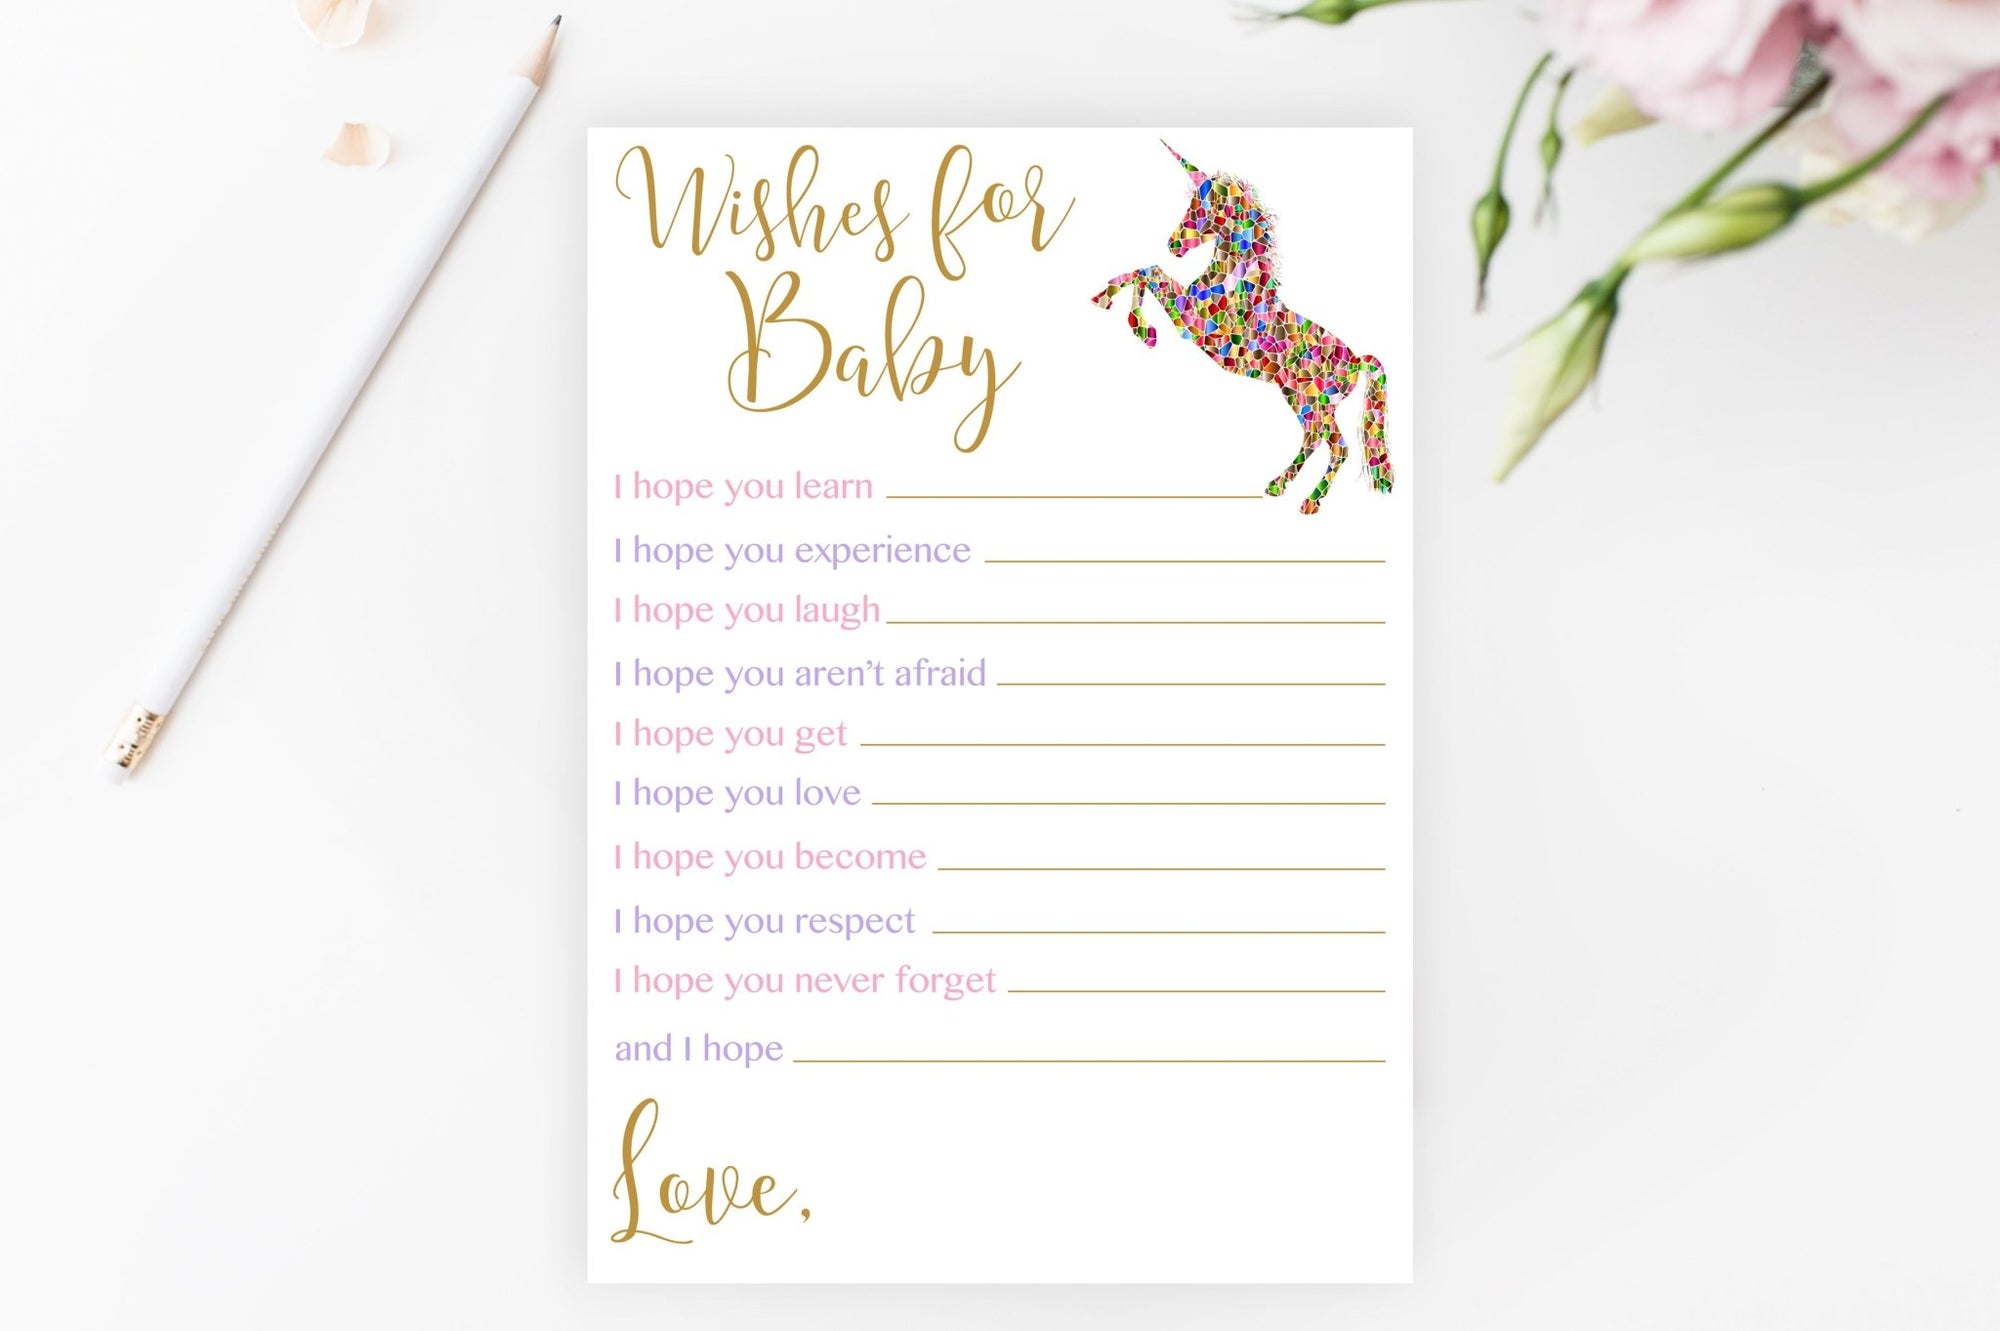 Wishes for Baby - Unicorn Printable - Pretty Collected